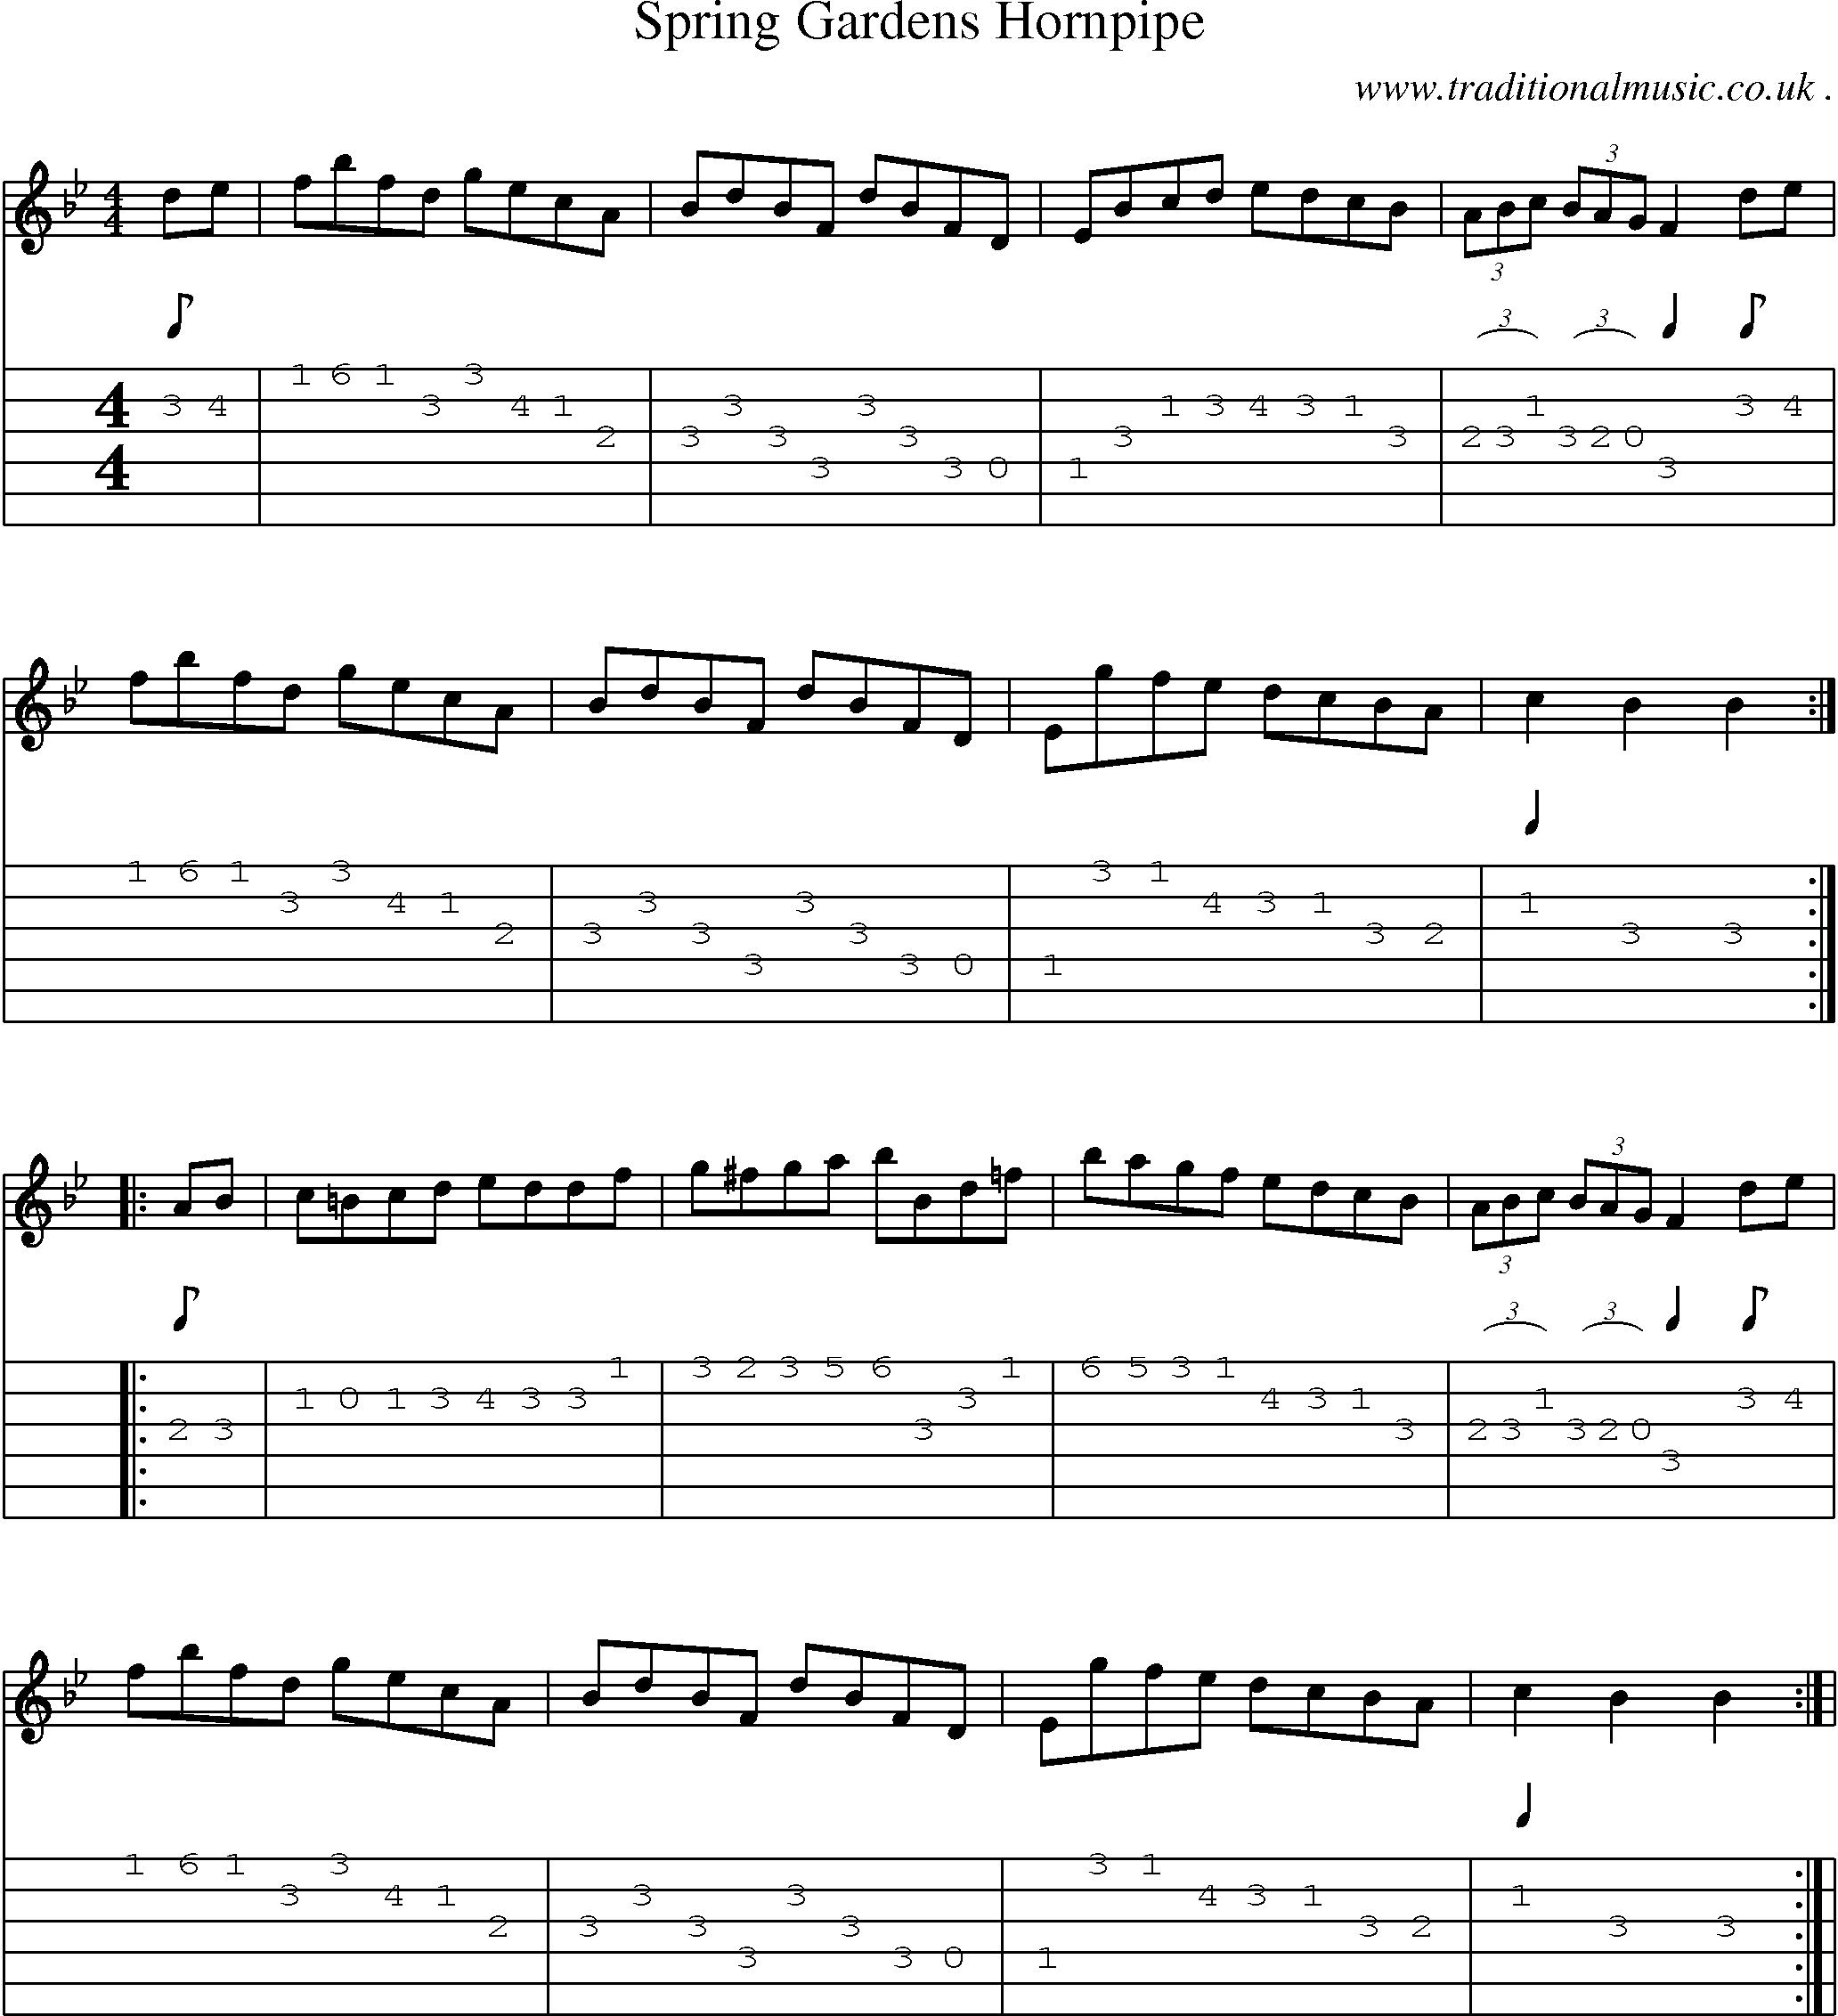 Sheet-Music and Guitar Tabs for Spring Gardens Hornpipe